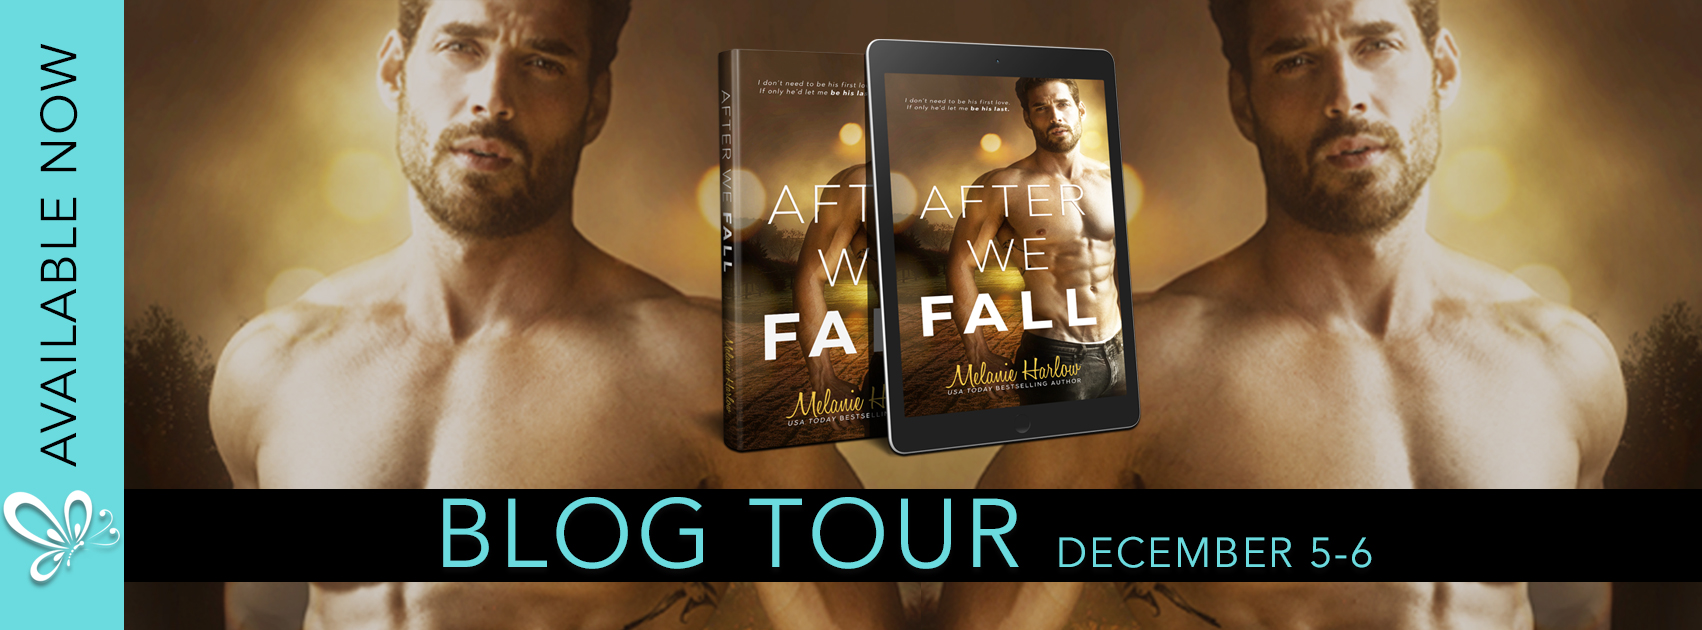 Review of After We Fall by Melanie Harlow